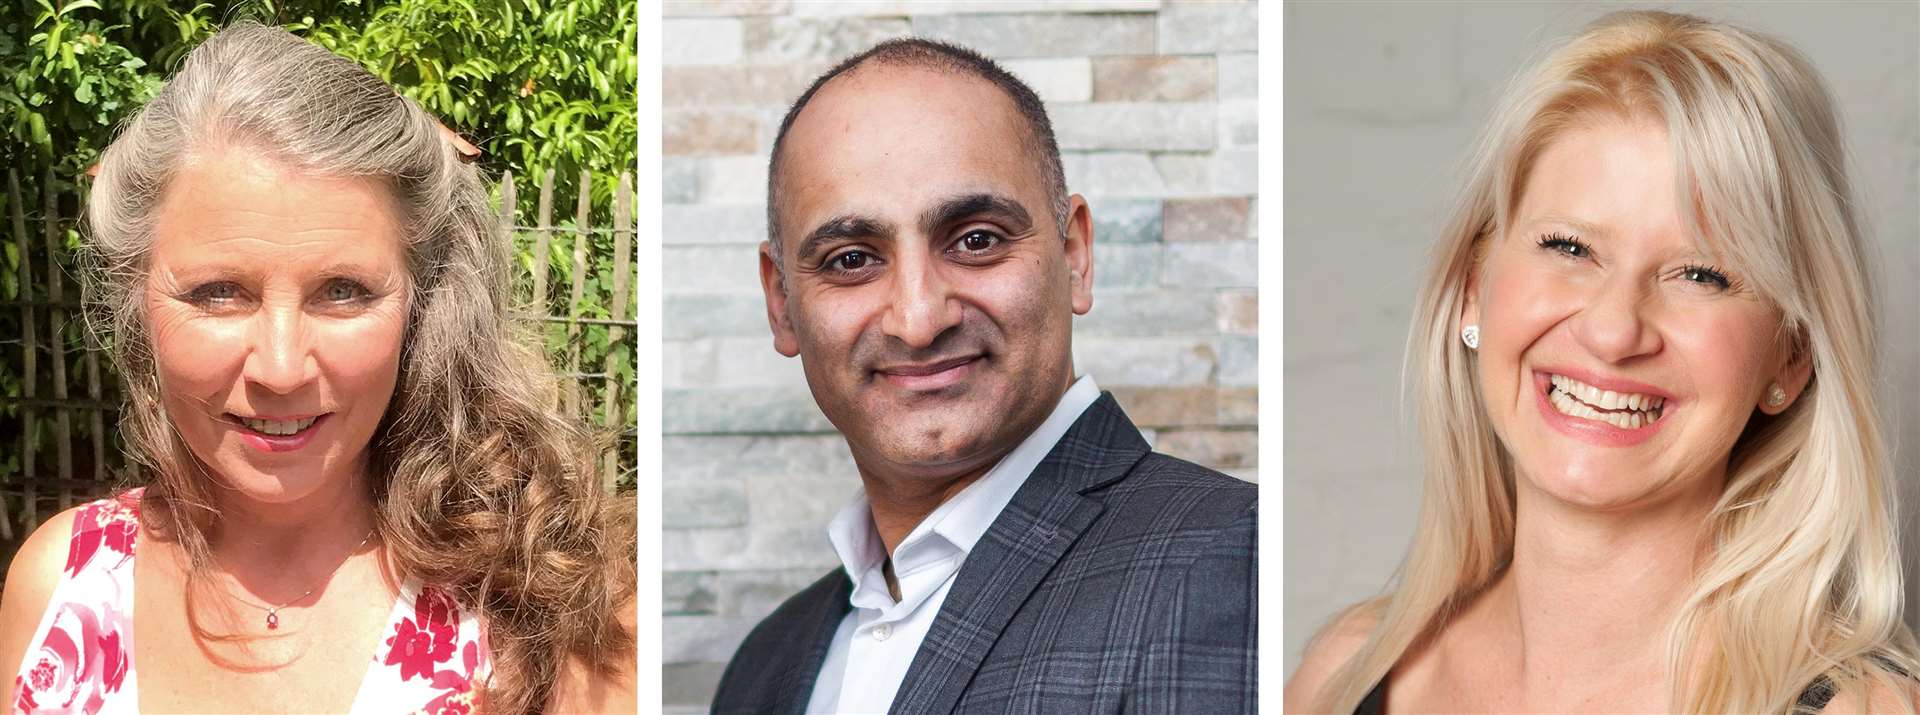 Helping hands: Women’s health physiotherapist Philippa Salmon, aesthetic fellow plastic surgeon Dr Rohit Seth and Pilates expert Sandrine Gasnier (left to right)